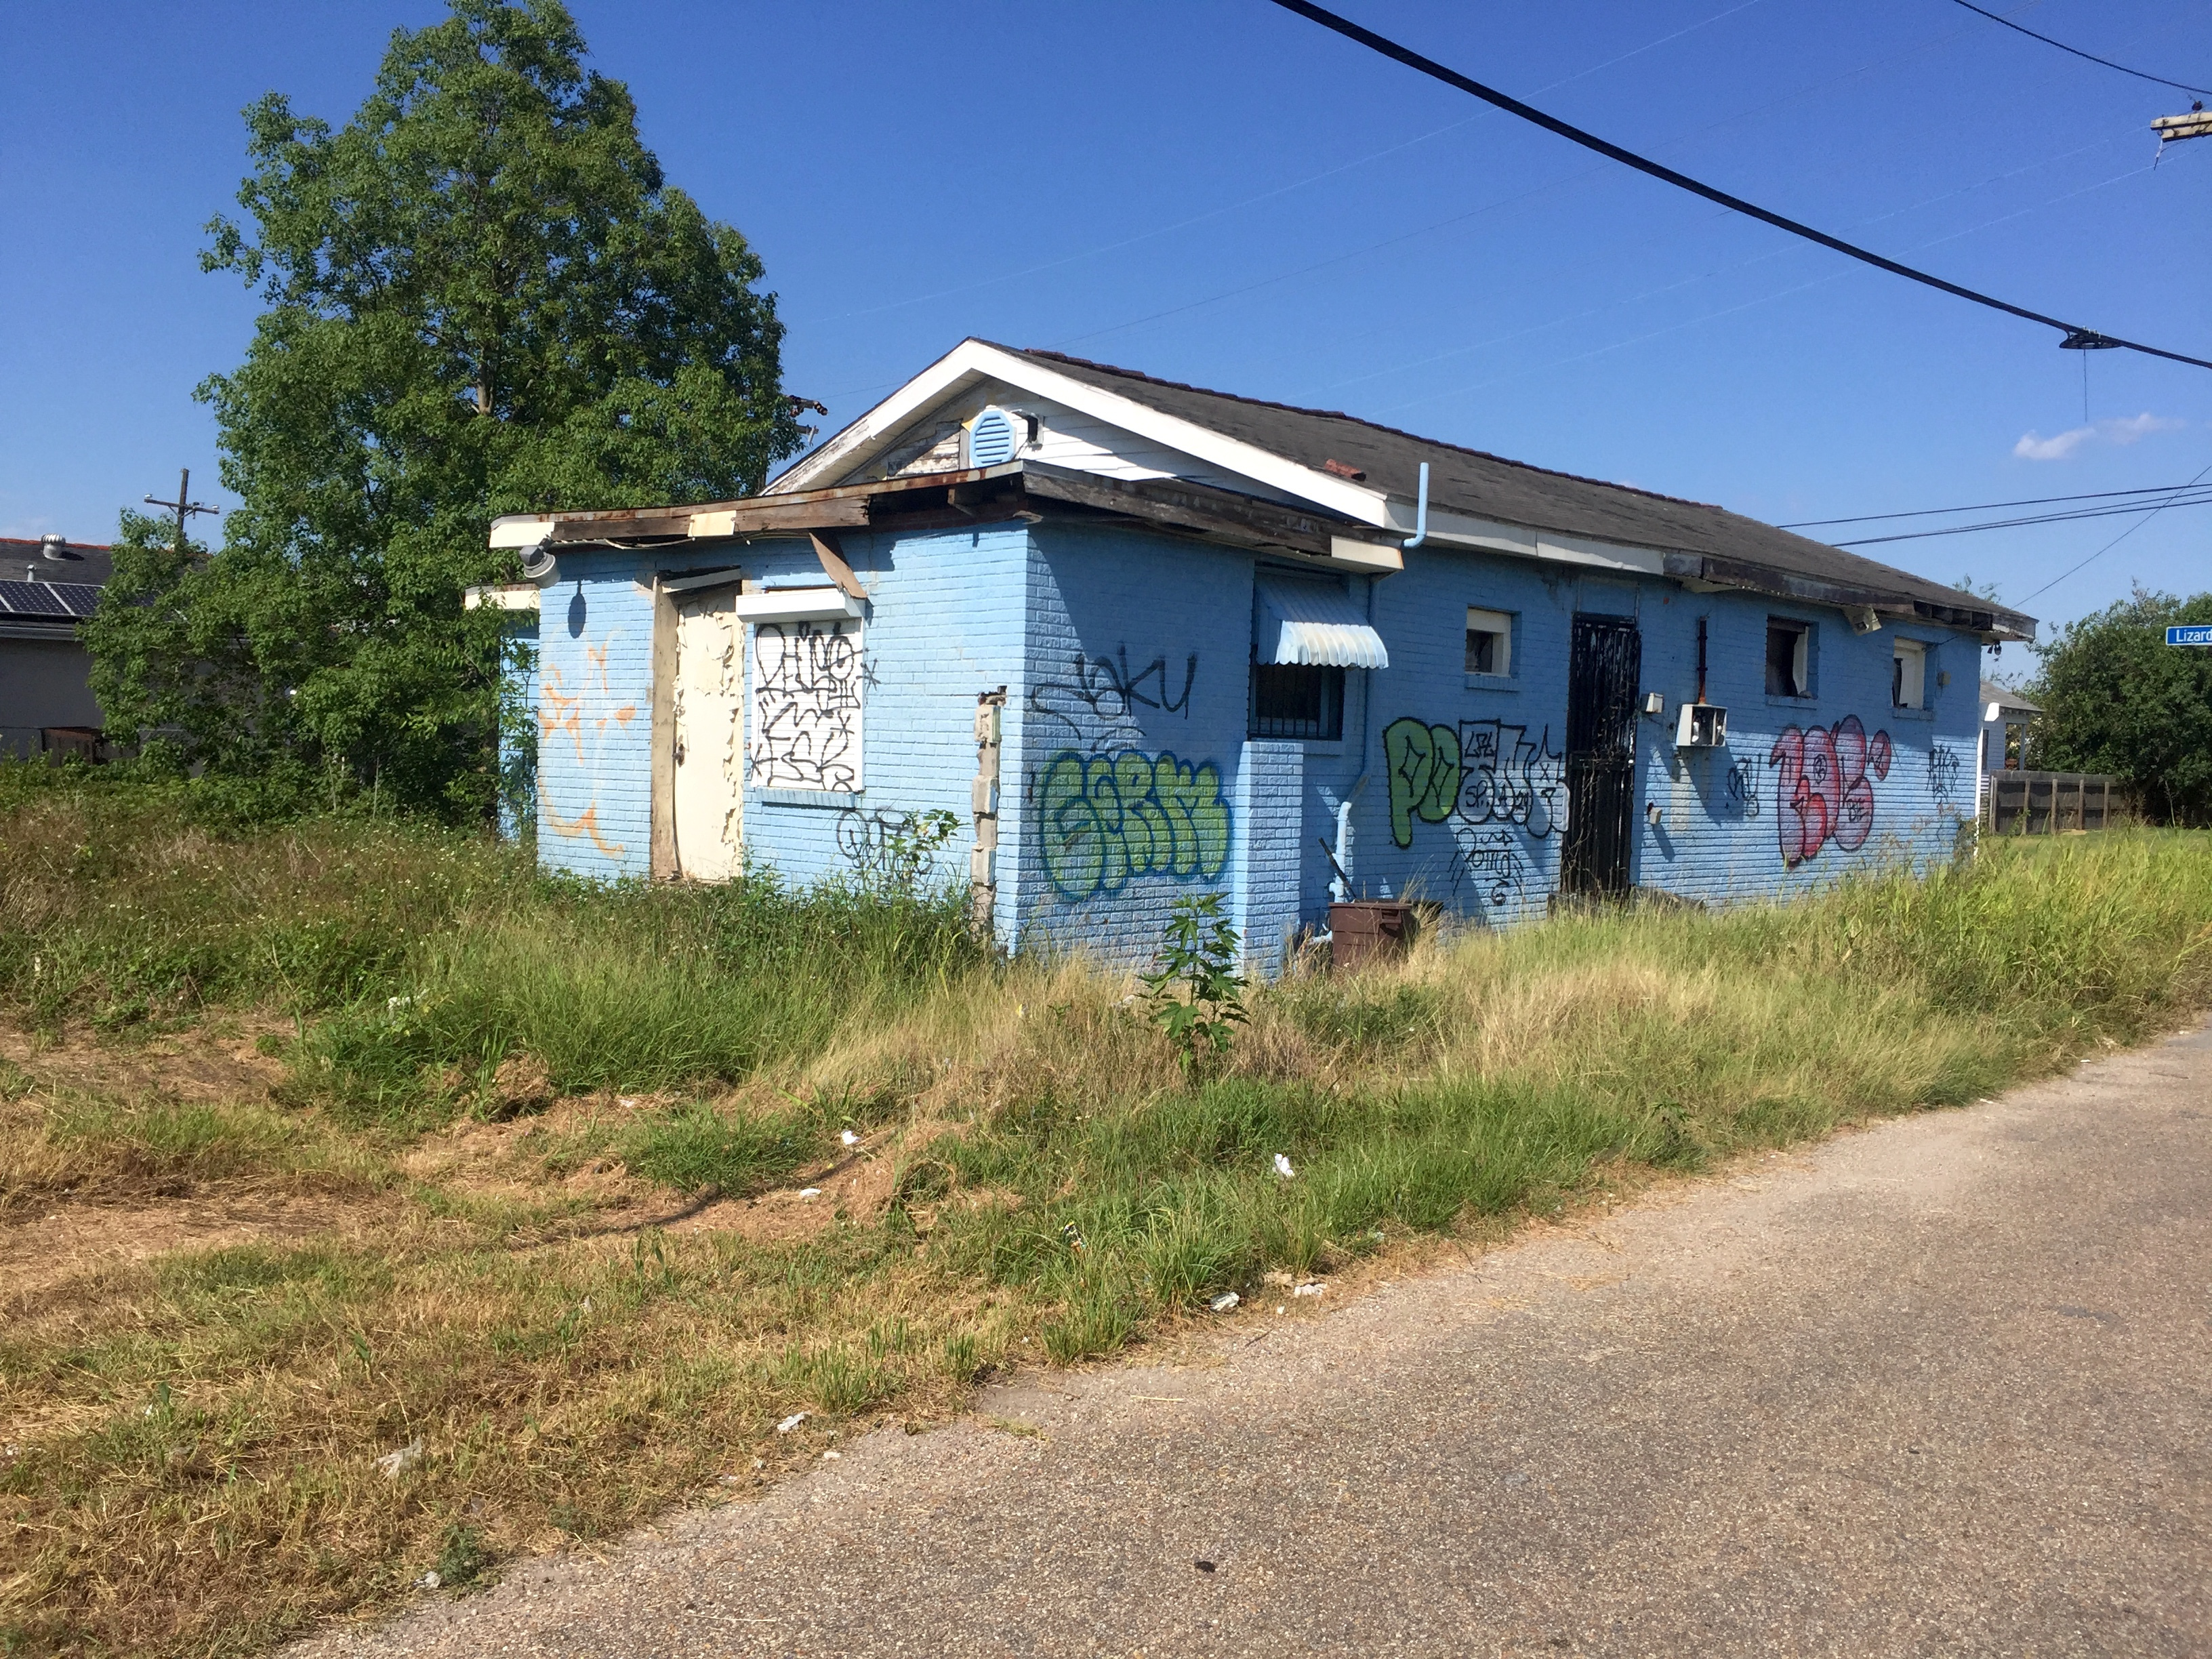  Much of the Lower Ninth Ward is still decayed and it looks nothing like the pre-Katrina days